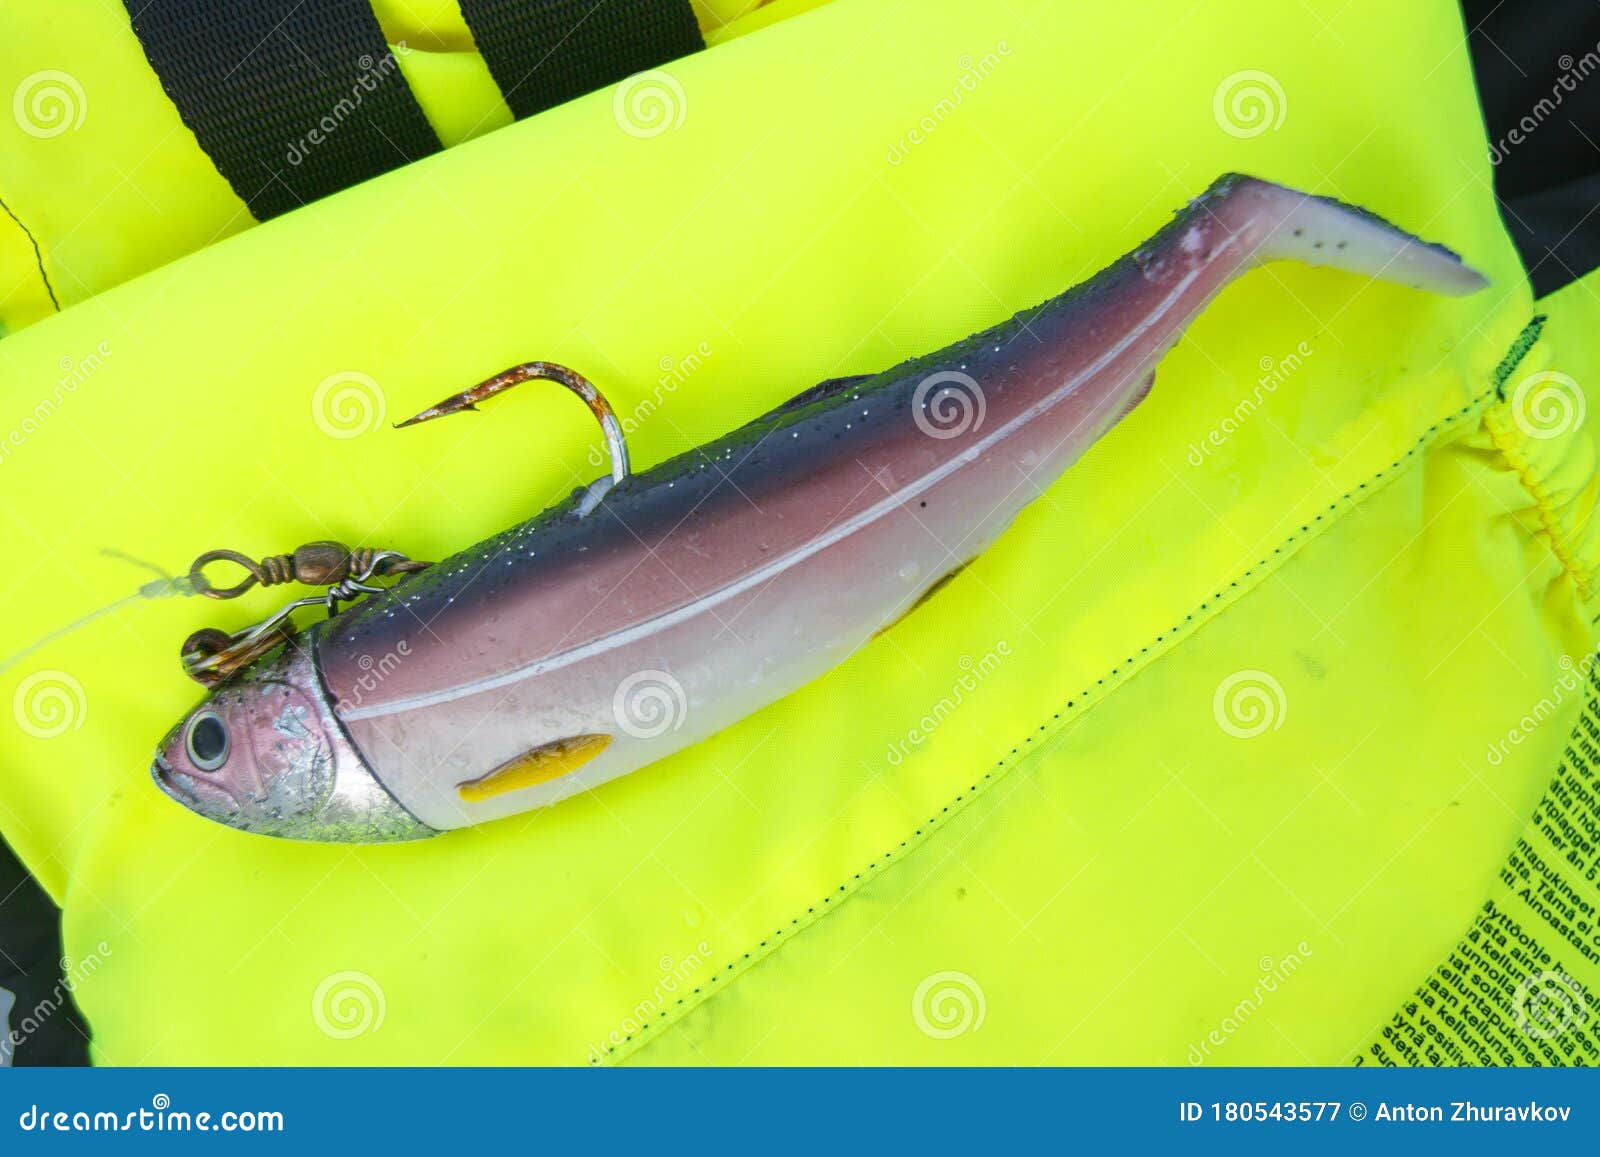 Big Fishing Silicone Bait with Hooks for Catching Cod Stock Image